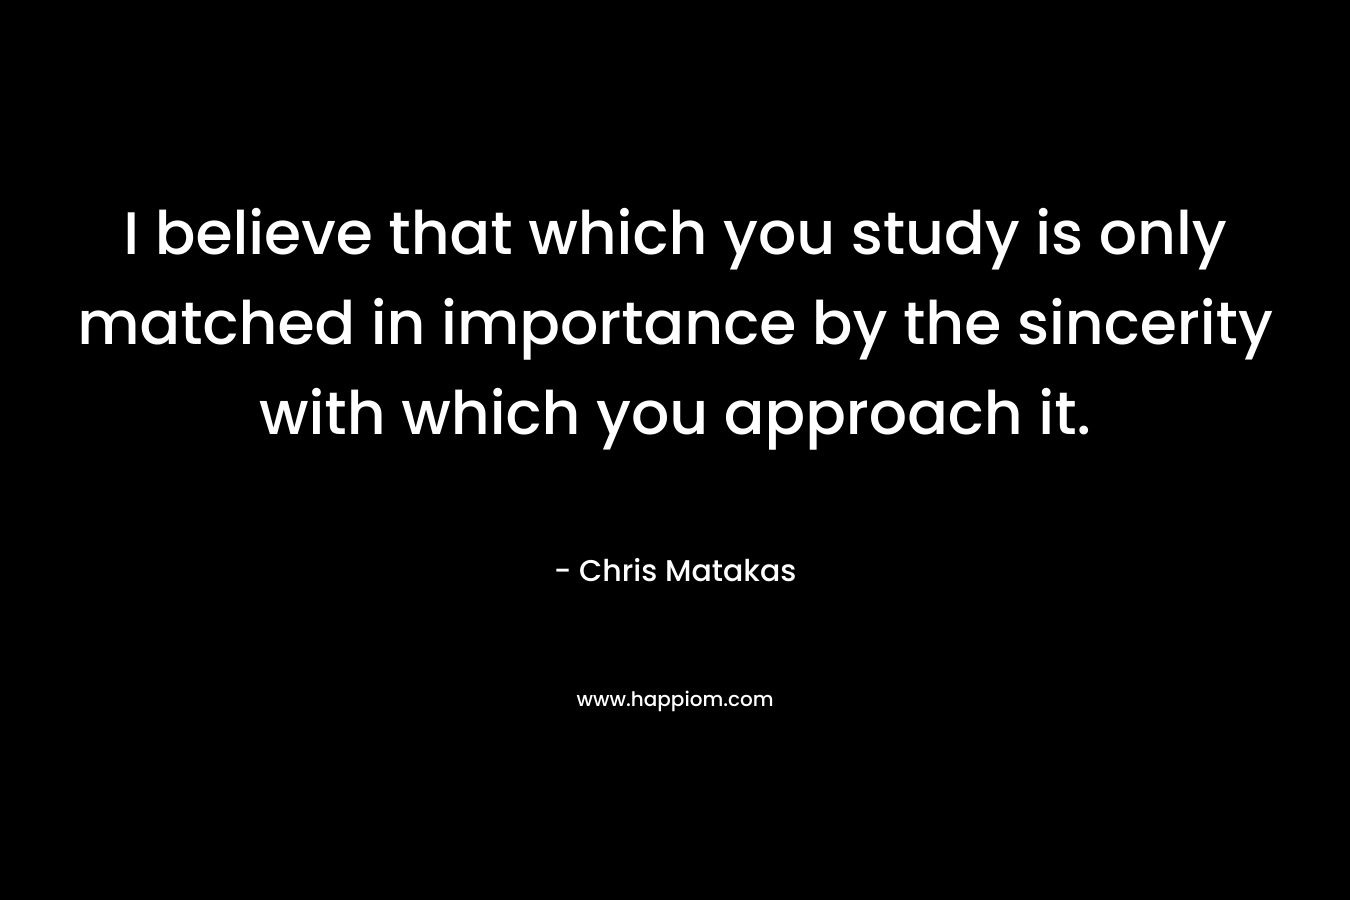 I believe that which you study is only matched in importance by the sincerity with which you approach it.